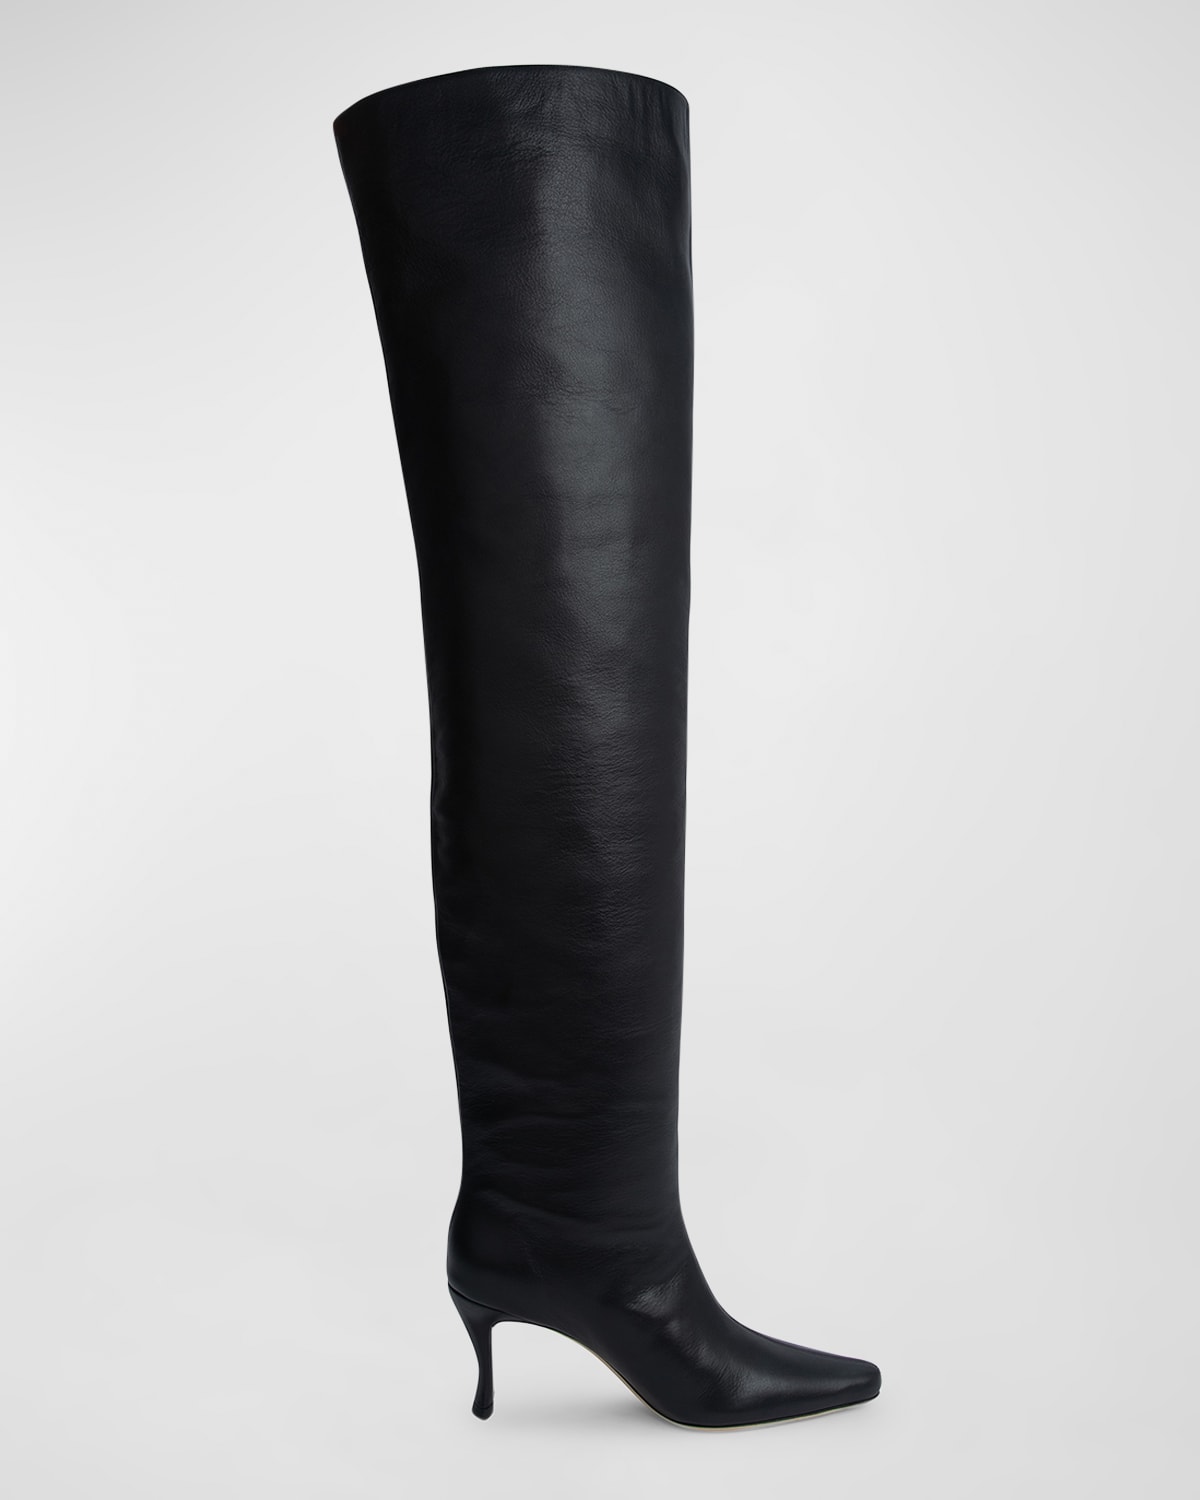 JW Anderson Leather Over-The-Knee Chain Boots | Neiman Marcus